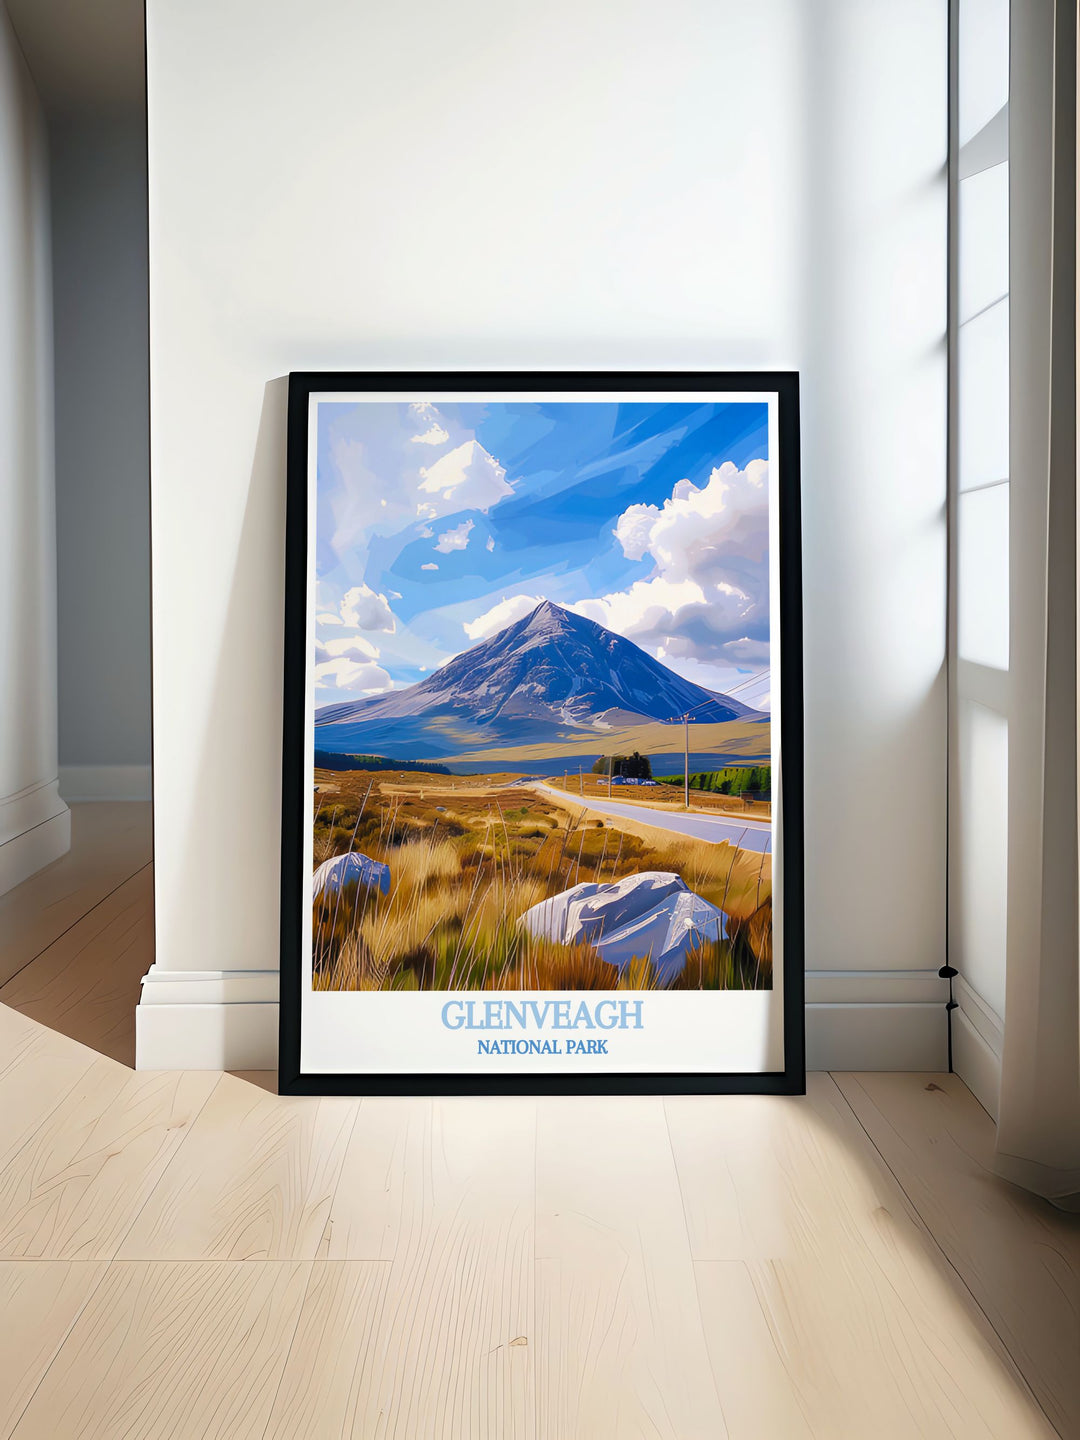 Gallery wall art of Glenveagh National Park, emphasizing the lush greenery and striking vistas of Mount Errigal, perfect for enhancing your living space with the charm of the Irish countryside.